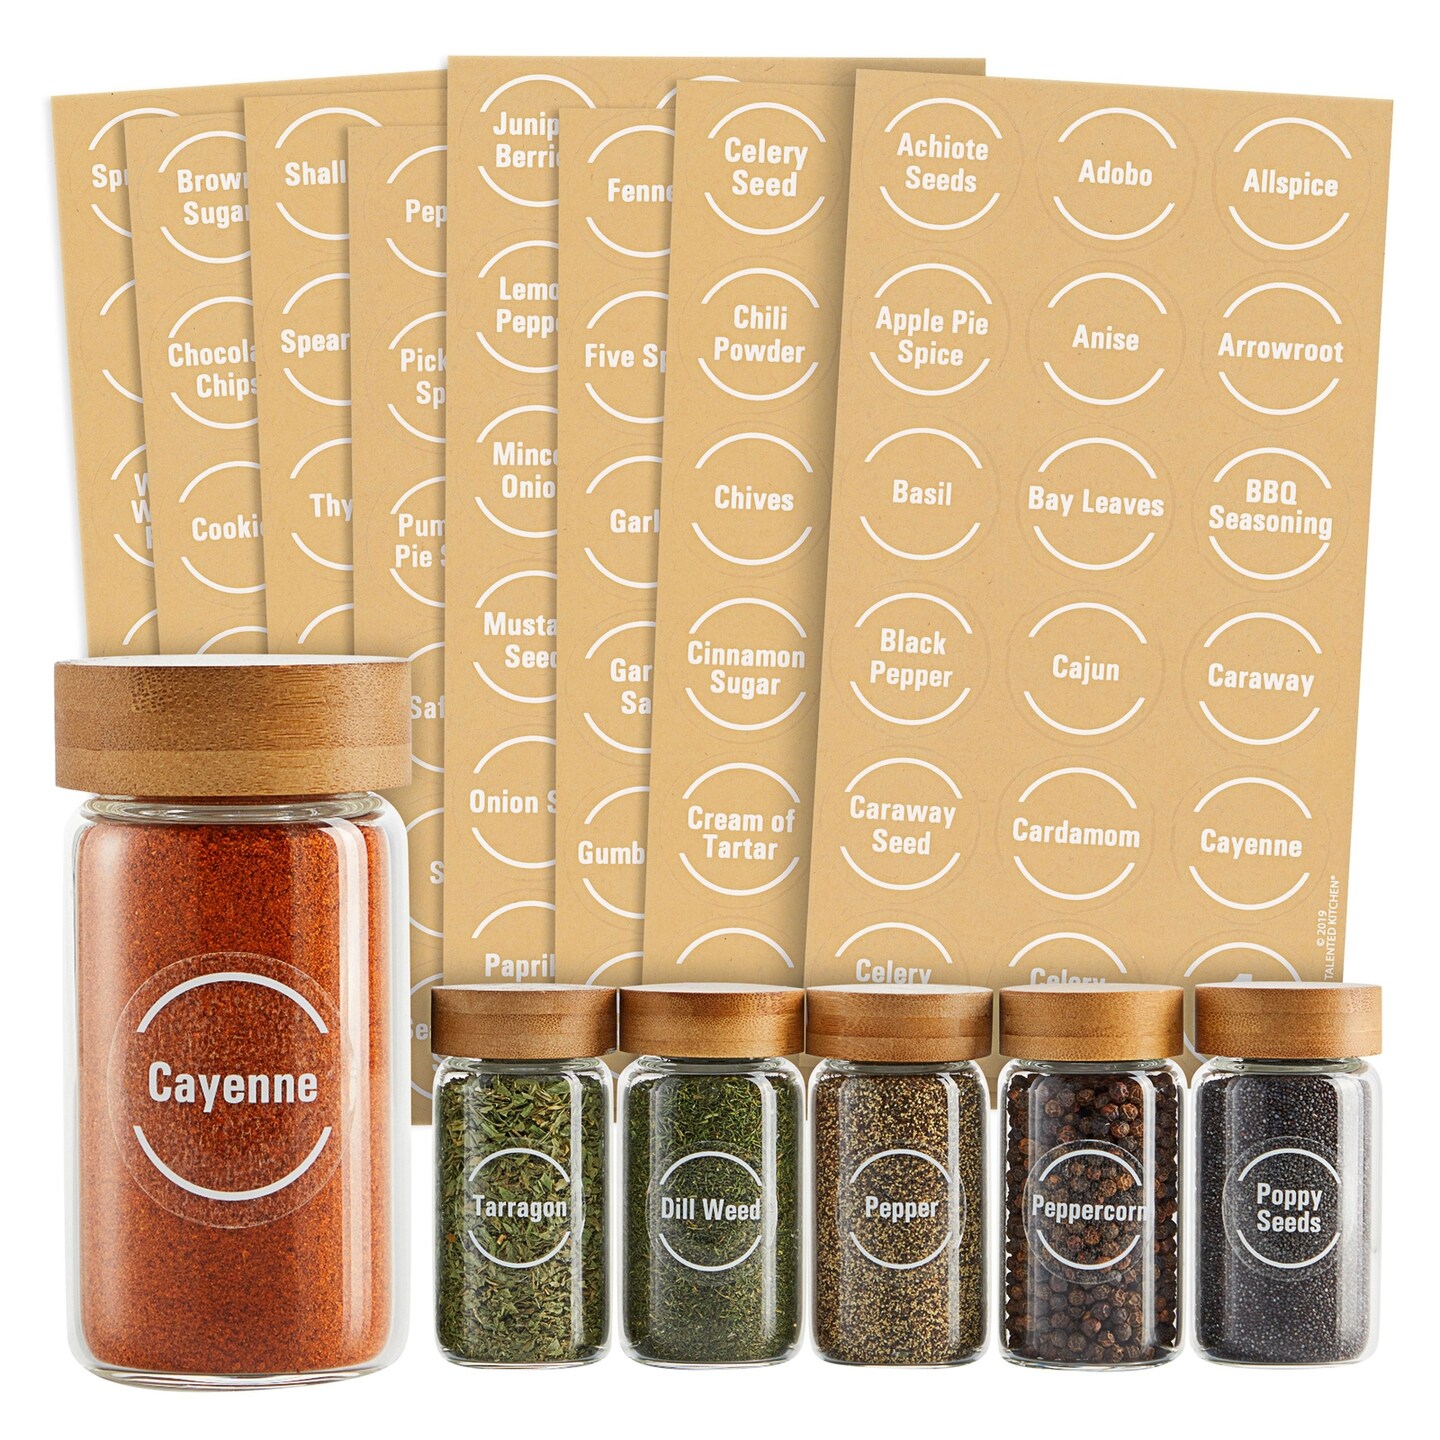 144 Spice Labels Stickers + Pantry Labels, Clear Spice Jar Labels Preprinted for Spice Jar Lids, Seasoning Spice Rack Organization, Water Resistant, Contemporary White (Round 1.5 In)